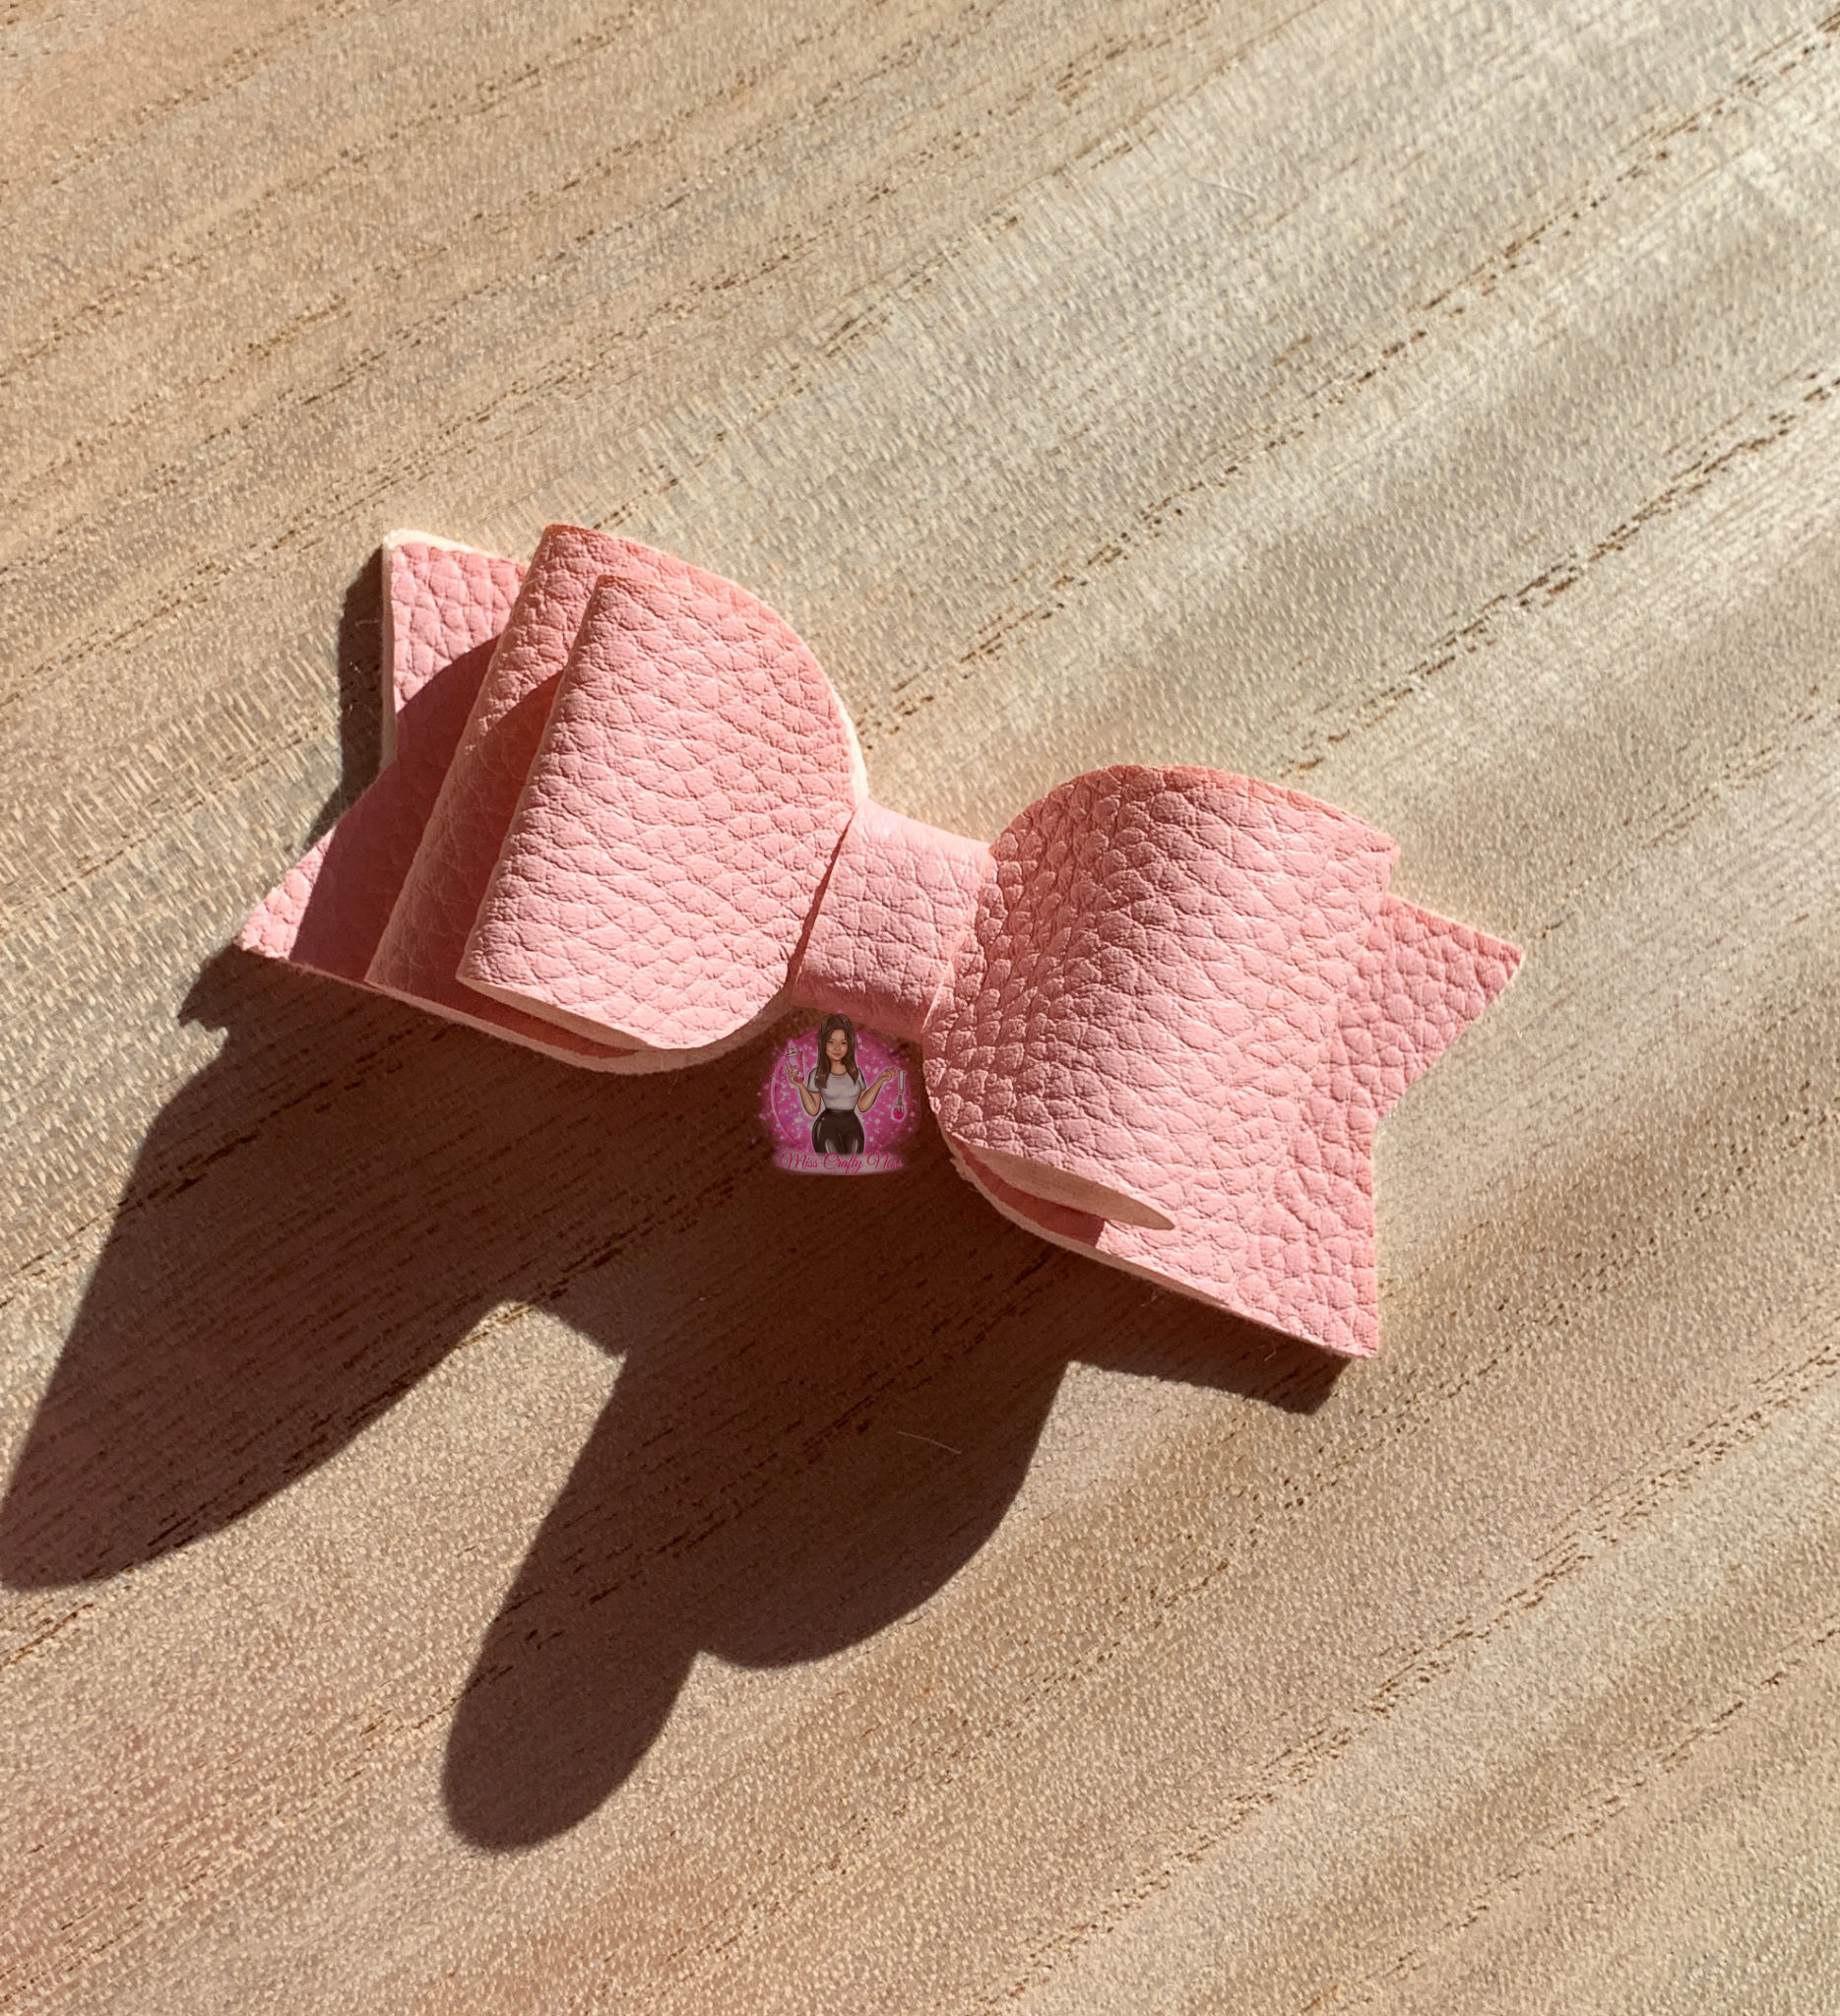 Pink Bow straw topper